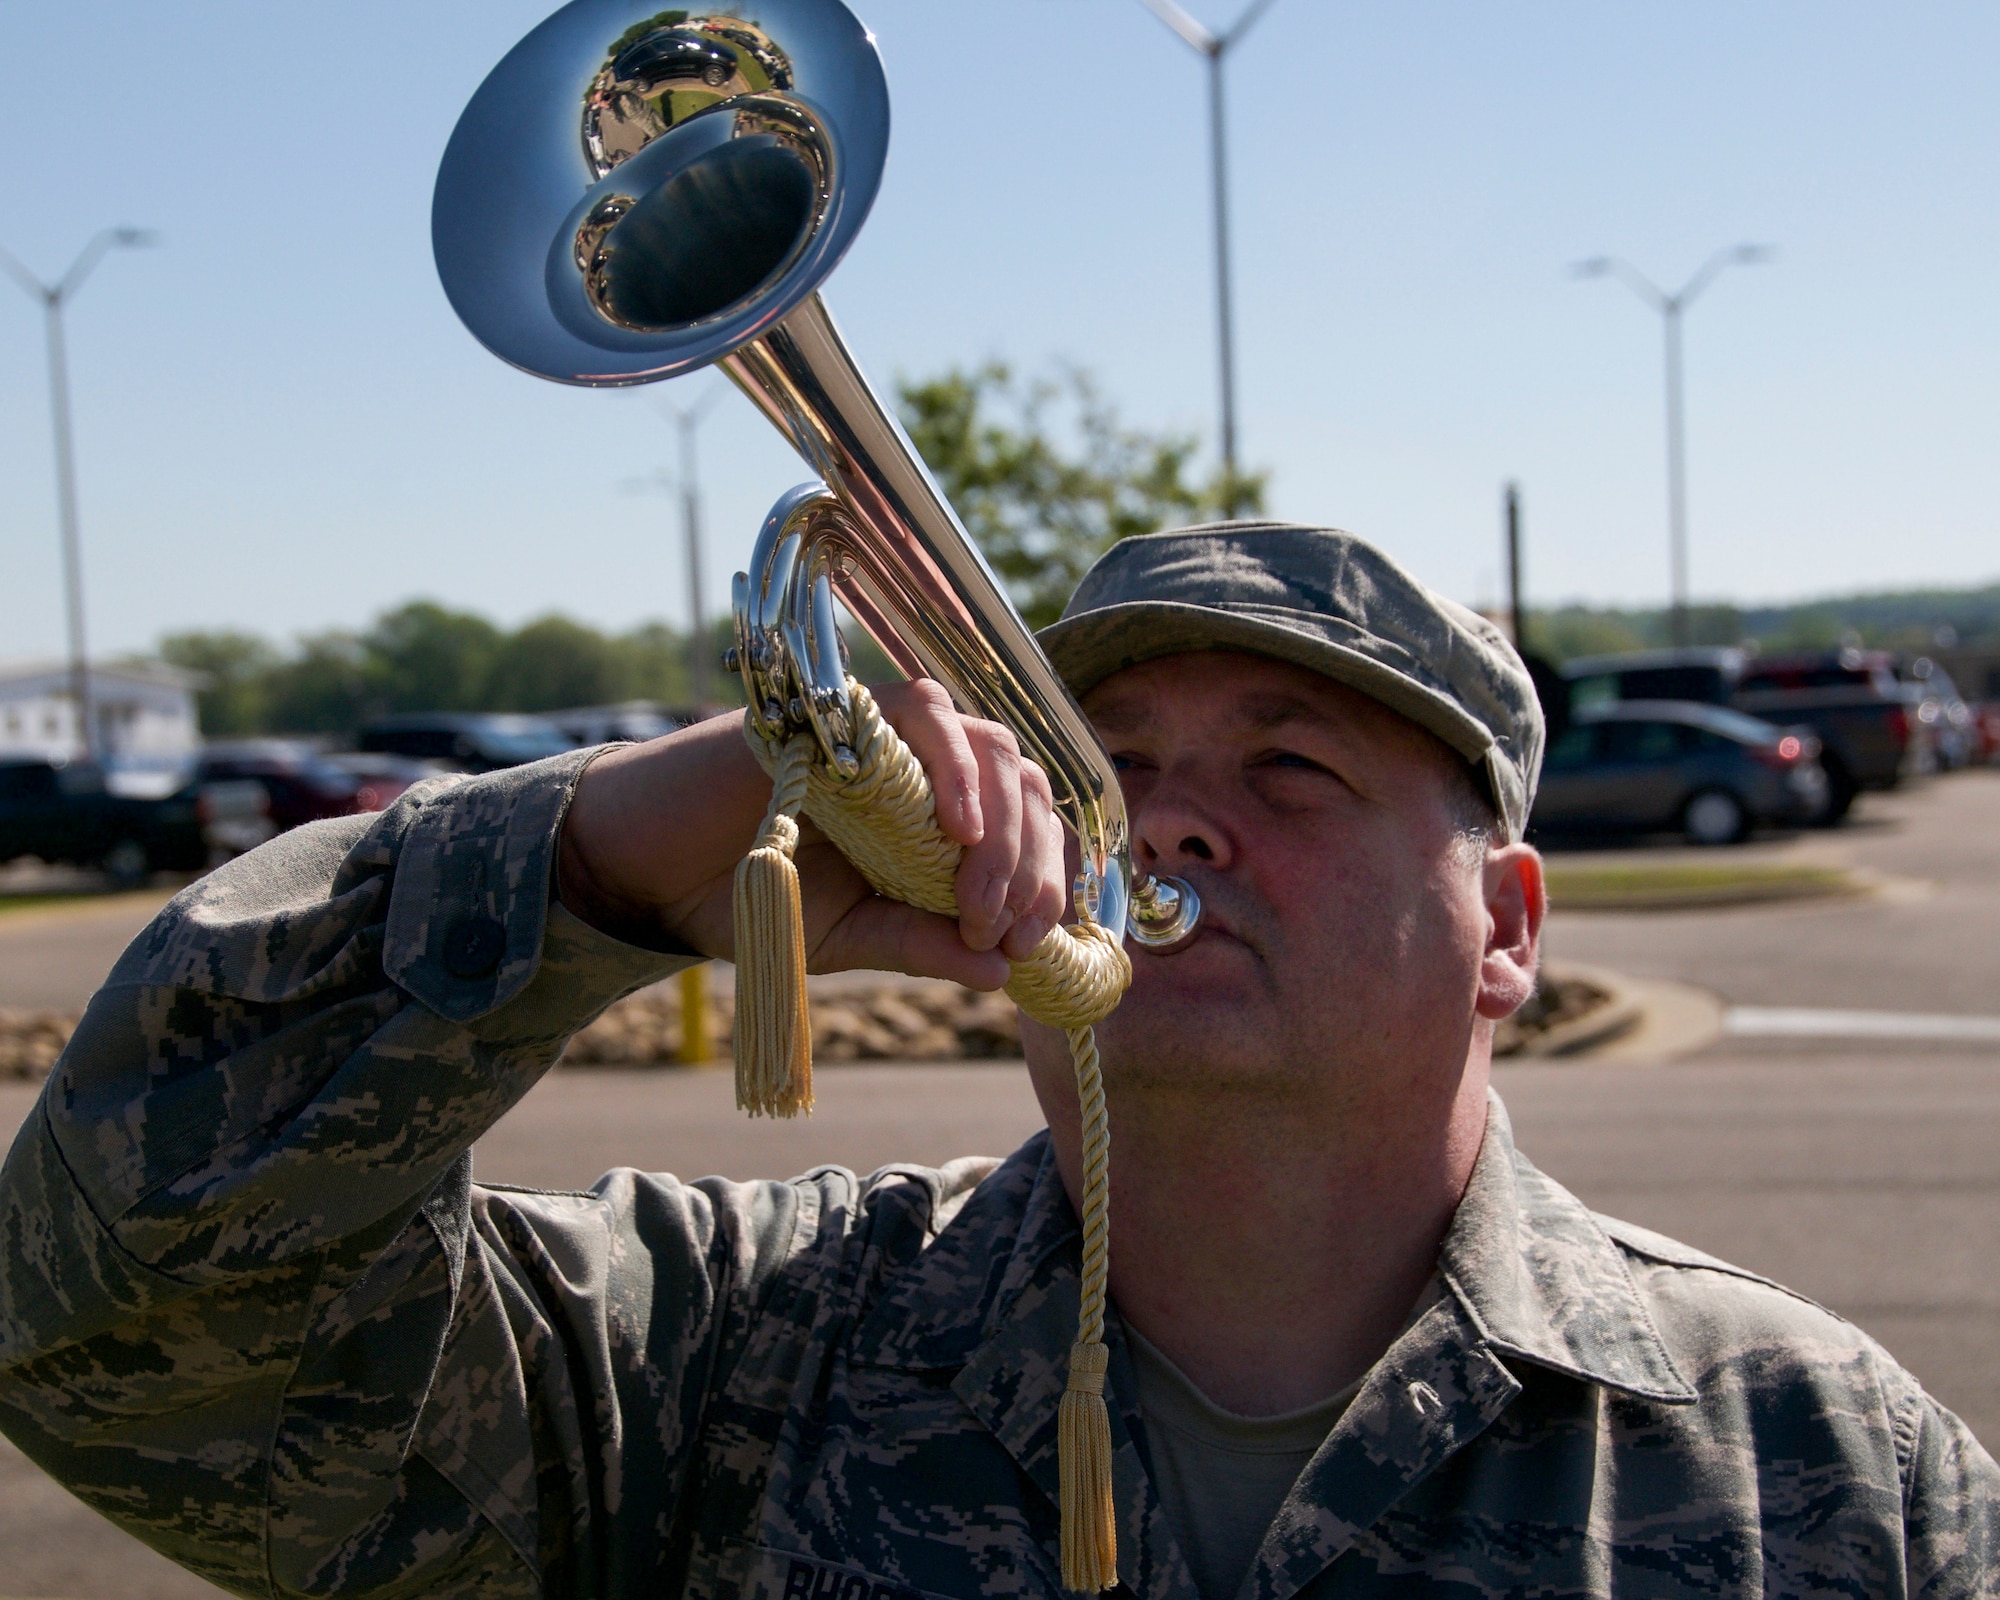 Tech. Sgt. John Rhoden, a functional assistant manager with the 186th Logistics Readiness Squadron, demonstrates how to play a bugle at Key Field Air National Guard Base, Meridian, Miss., April 8, 2018.